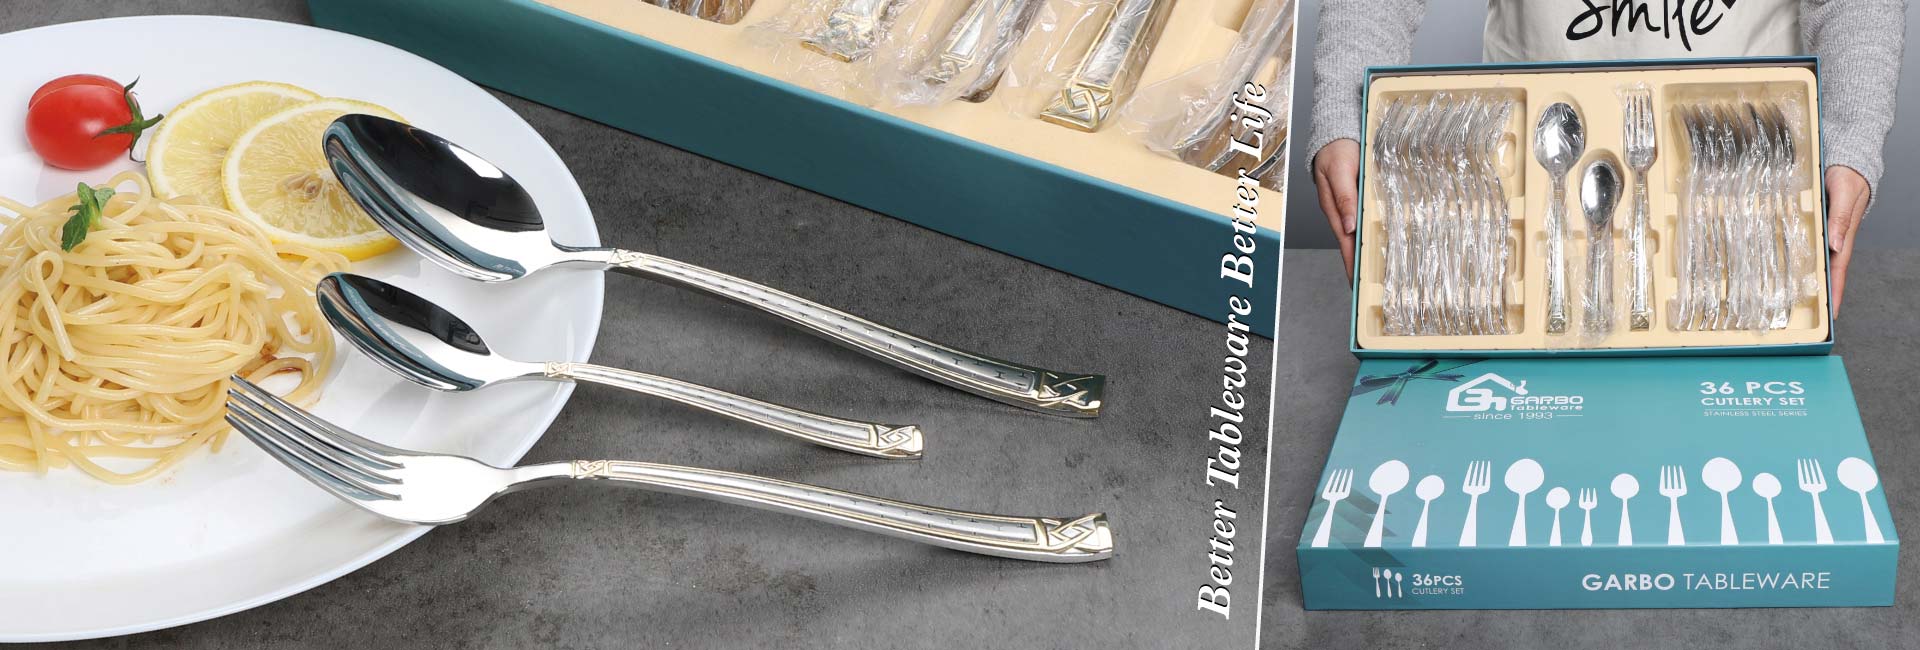 stainless steel cutlery manufacturer new product